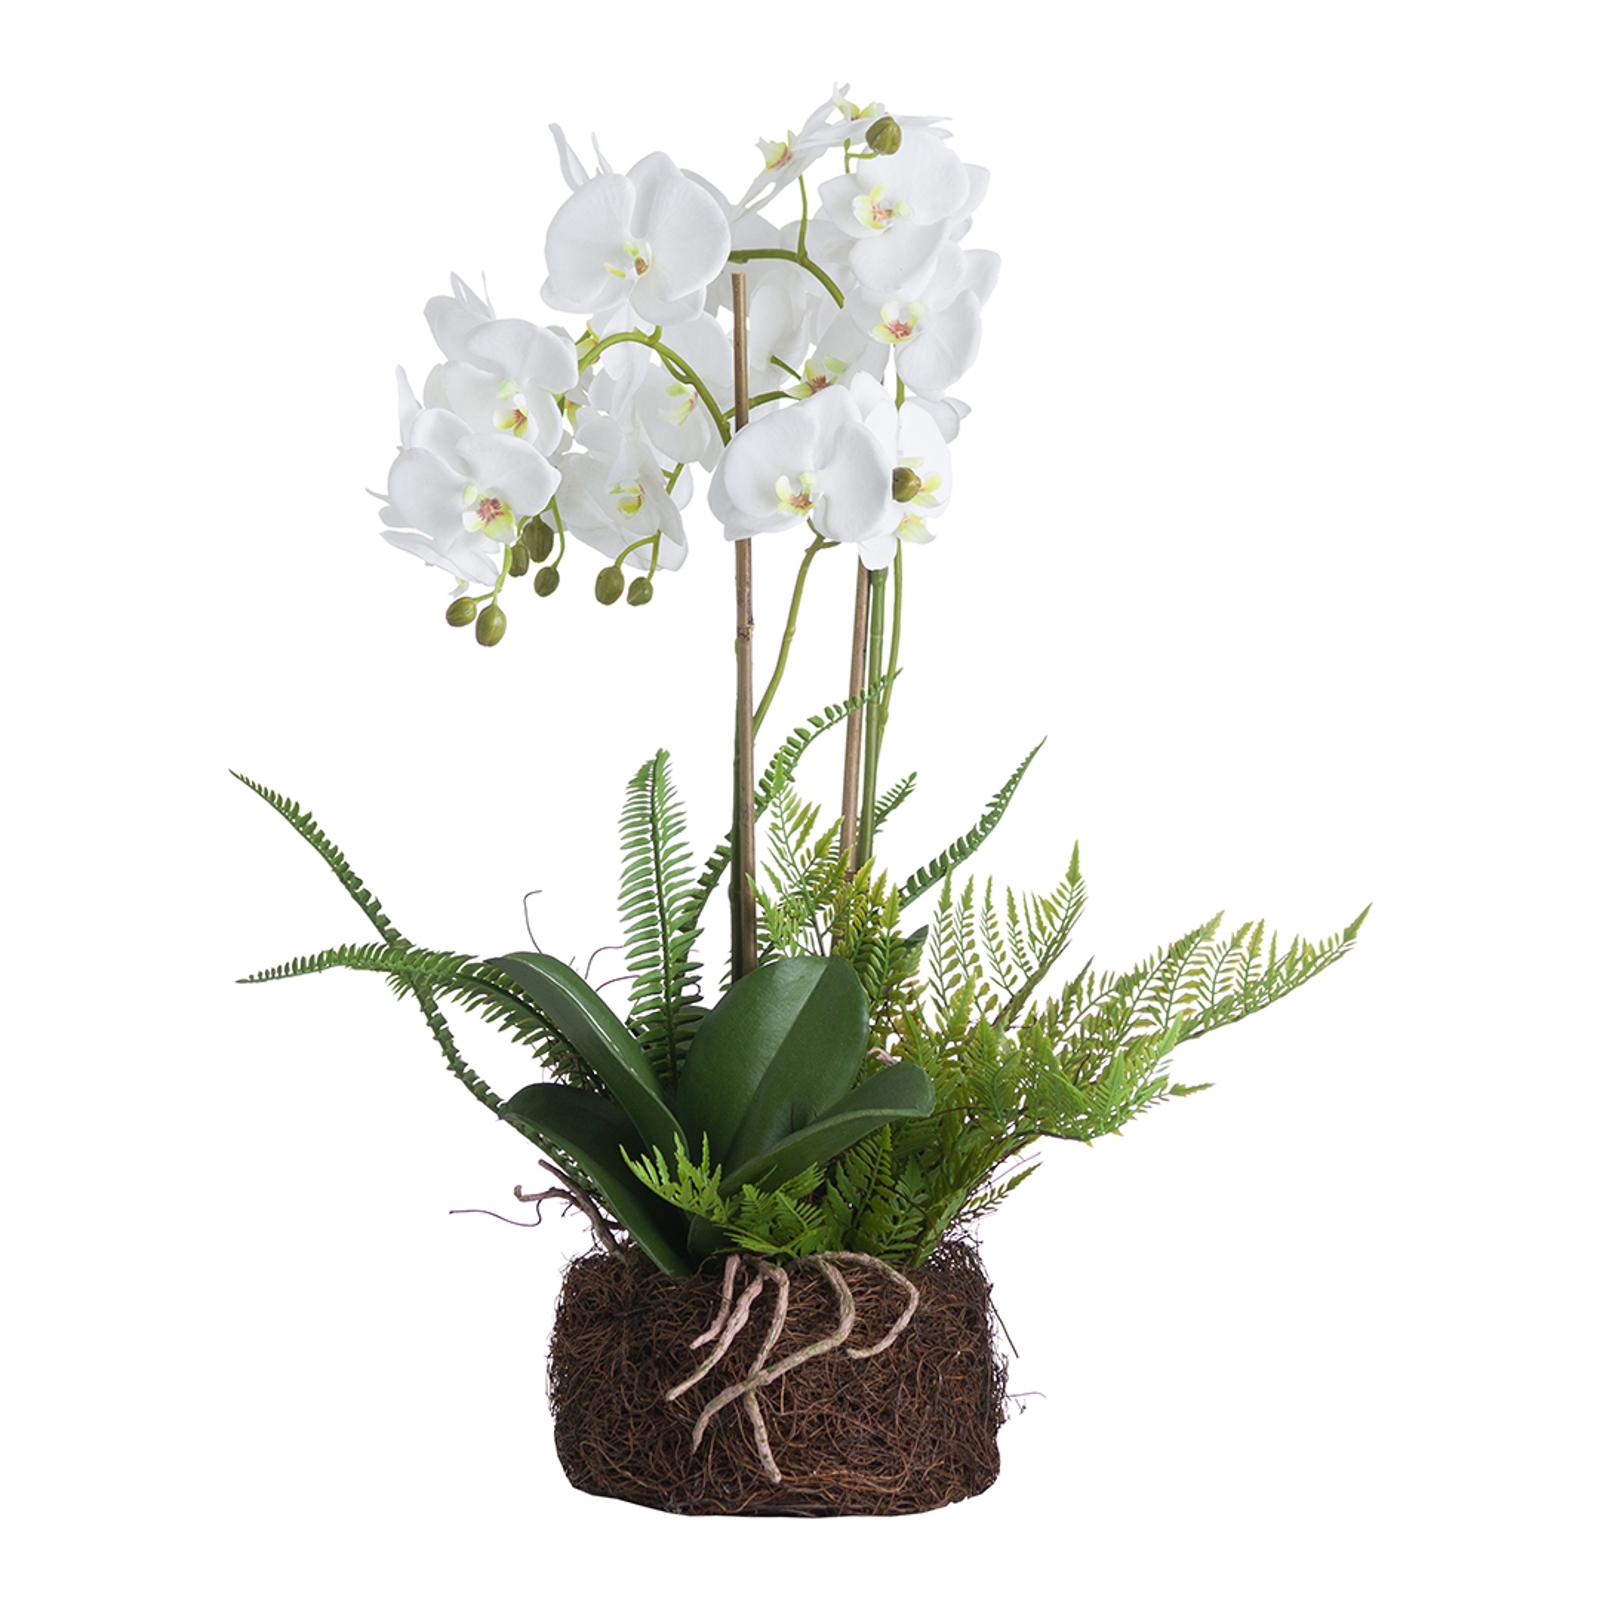 Faux Large White Orchid And Fern Garden In Rootball - BrandAlley